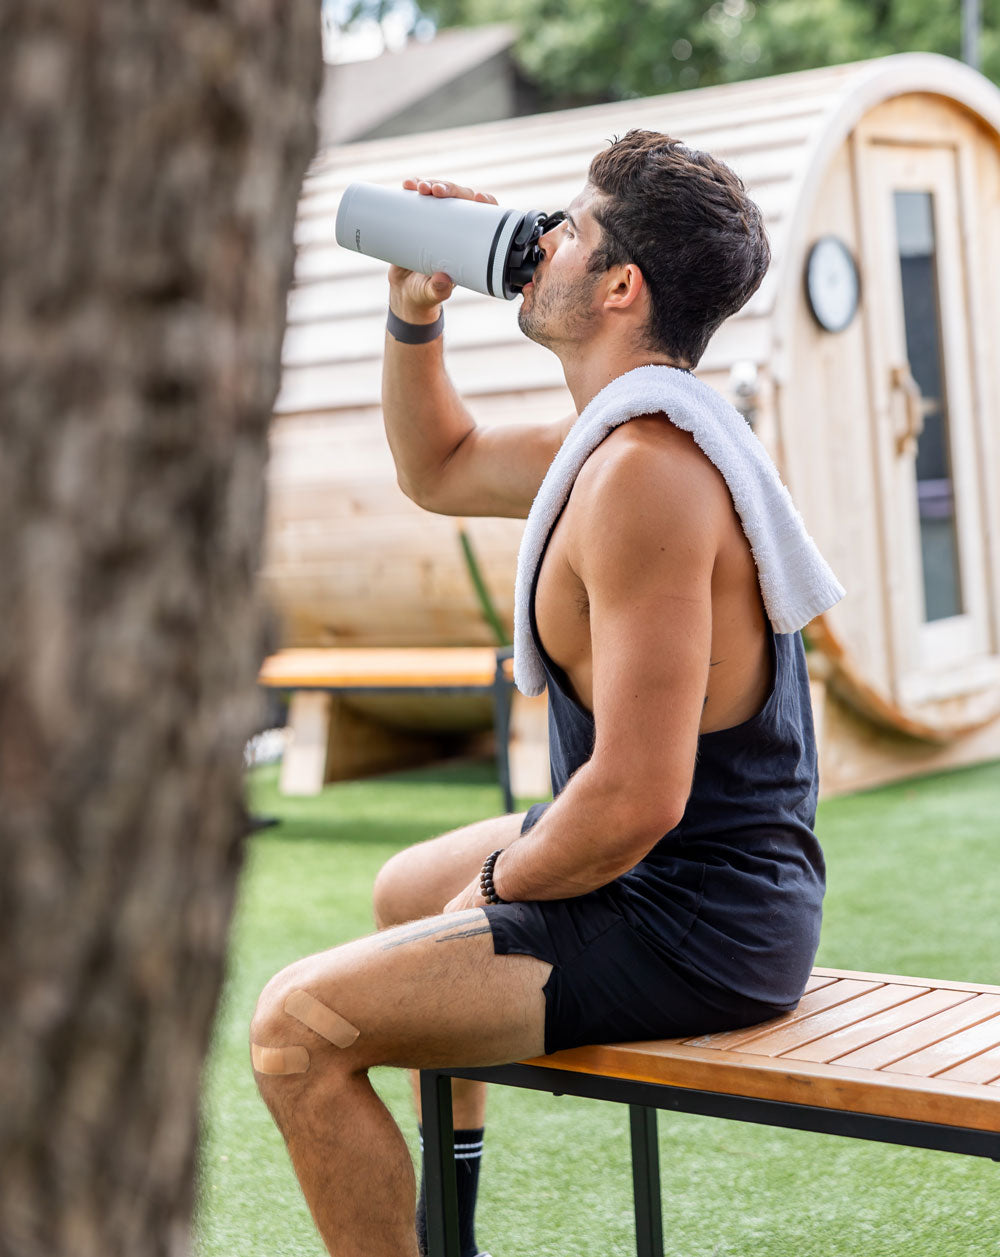 an image of a man sitting outdoors drinking water from an insulated Ice shaker Bottle